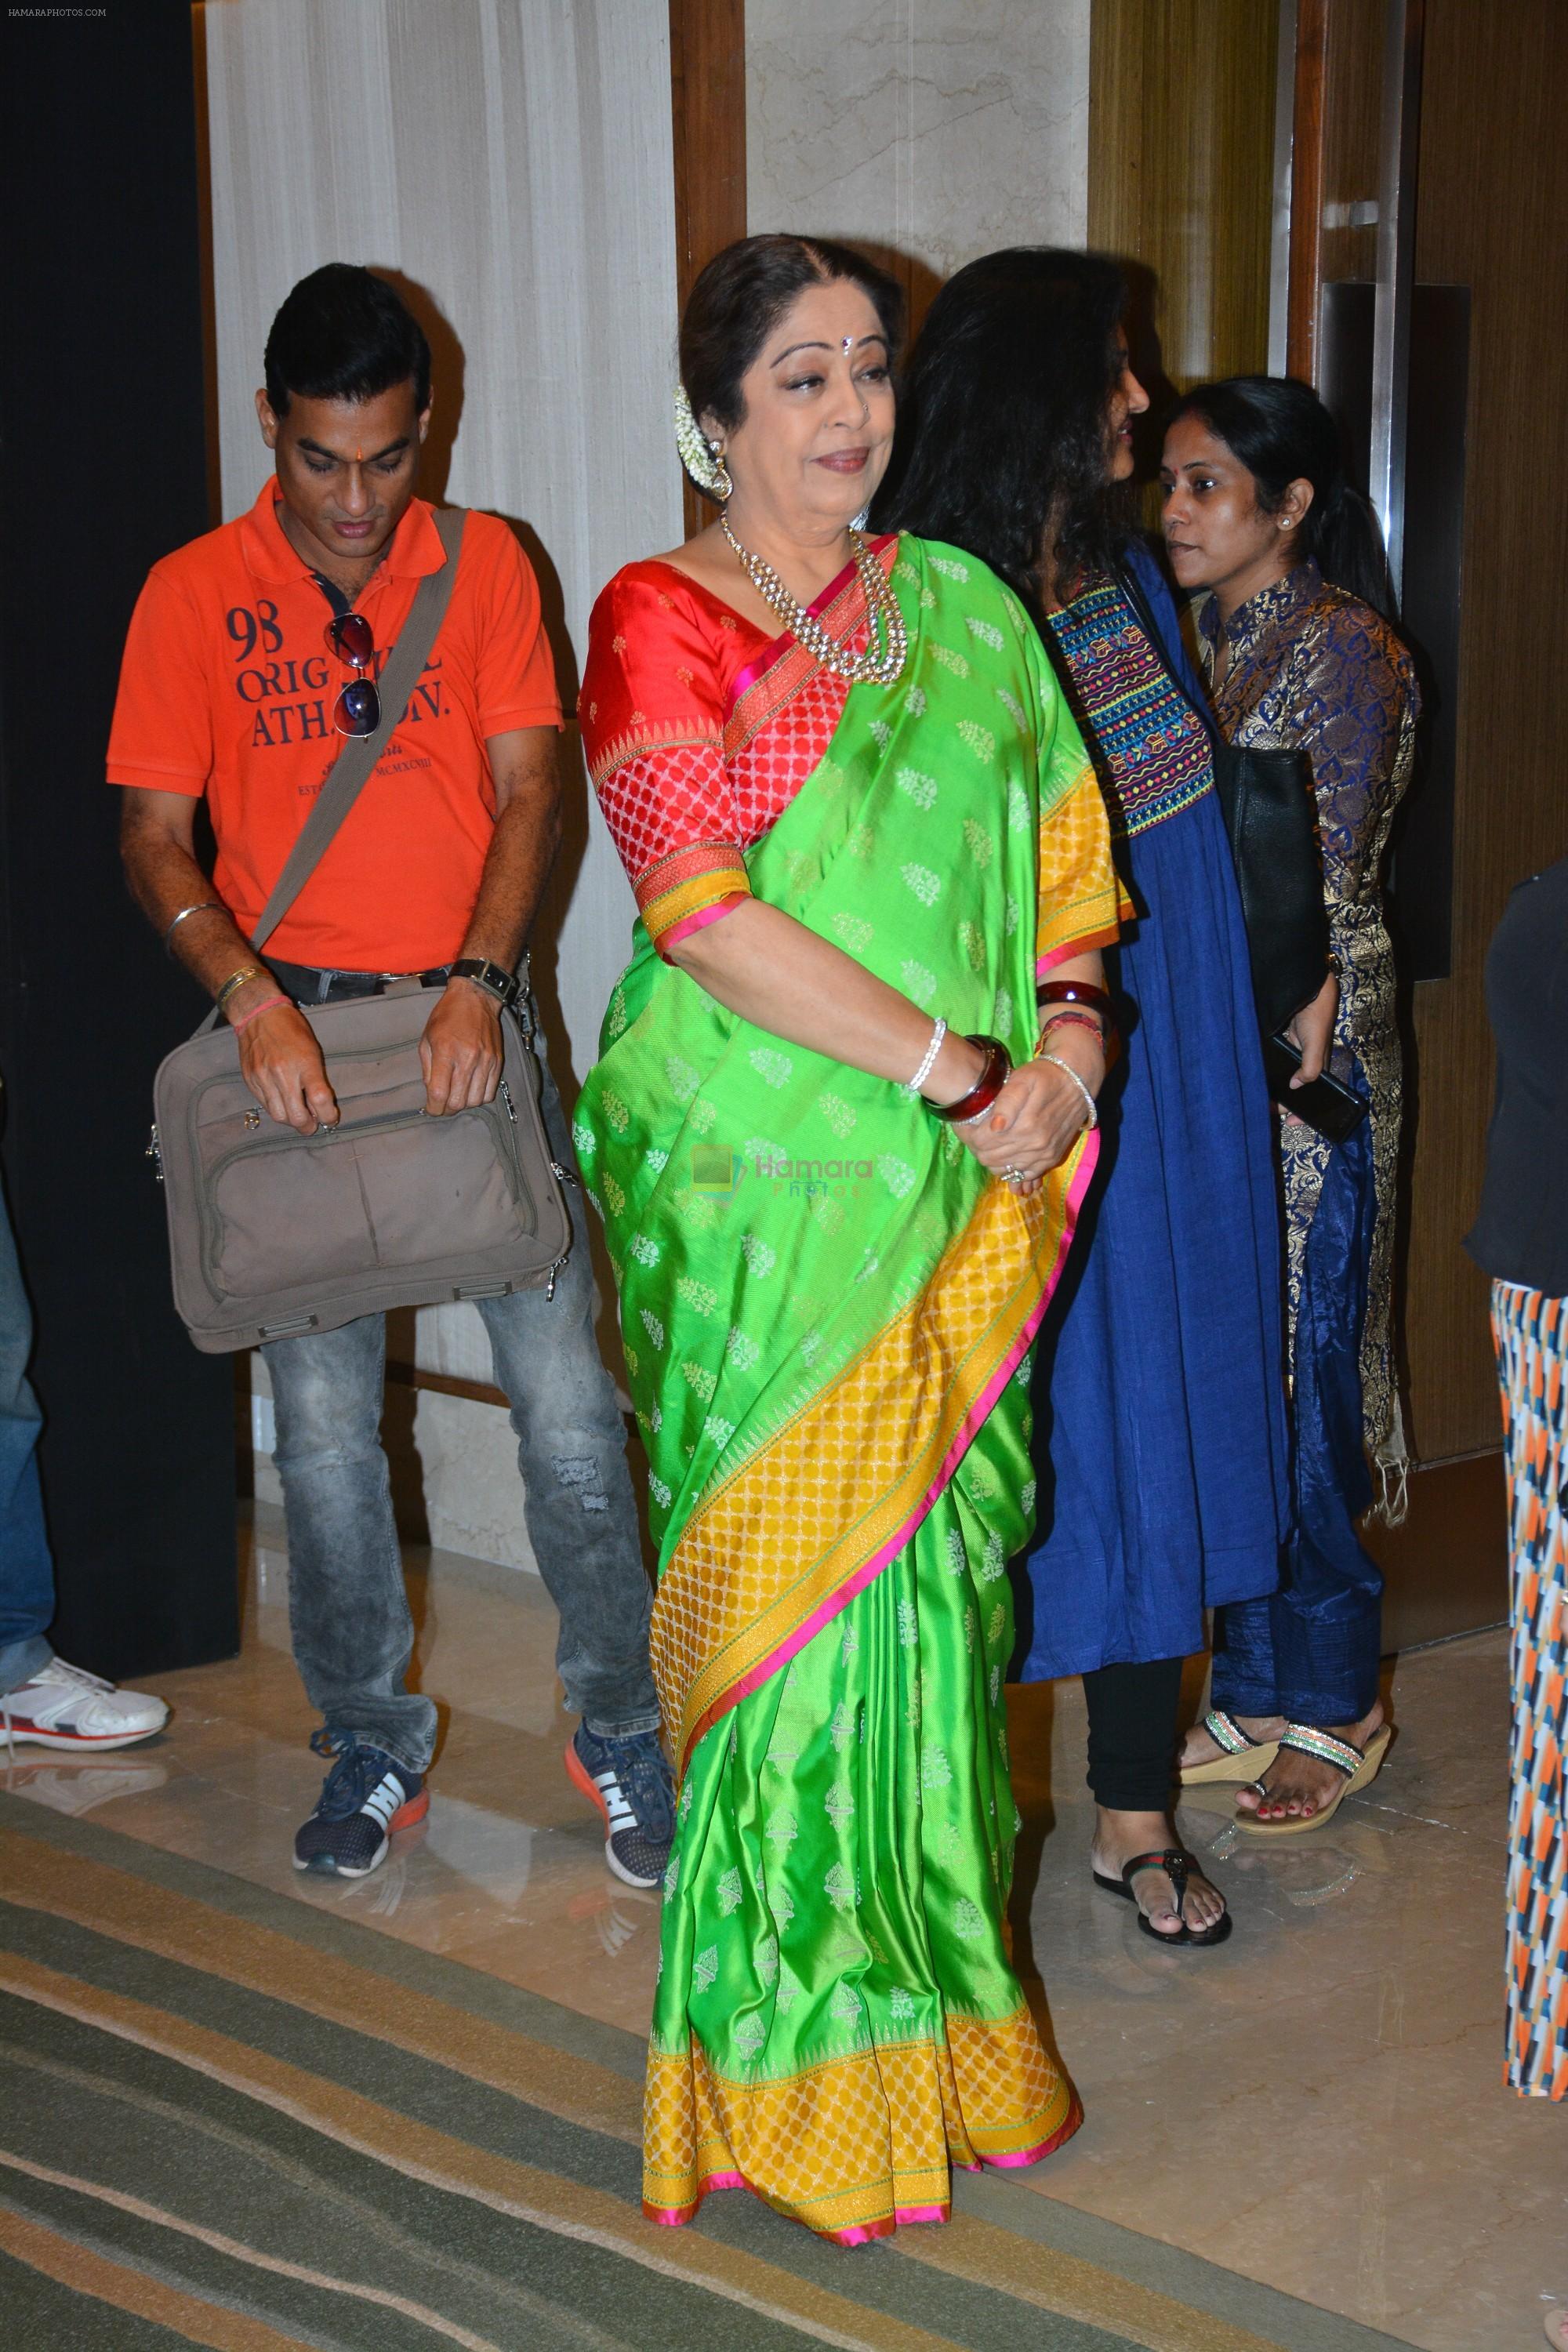 Kirron Kher at the Launch of India's got talent in Trident bkc on 14th Oct 2018